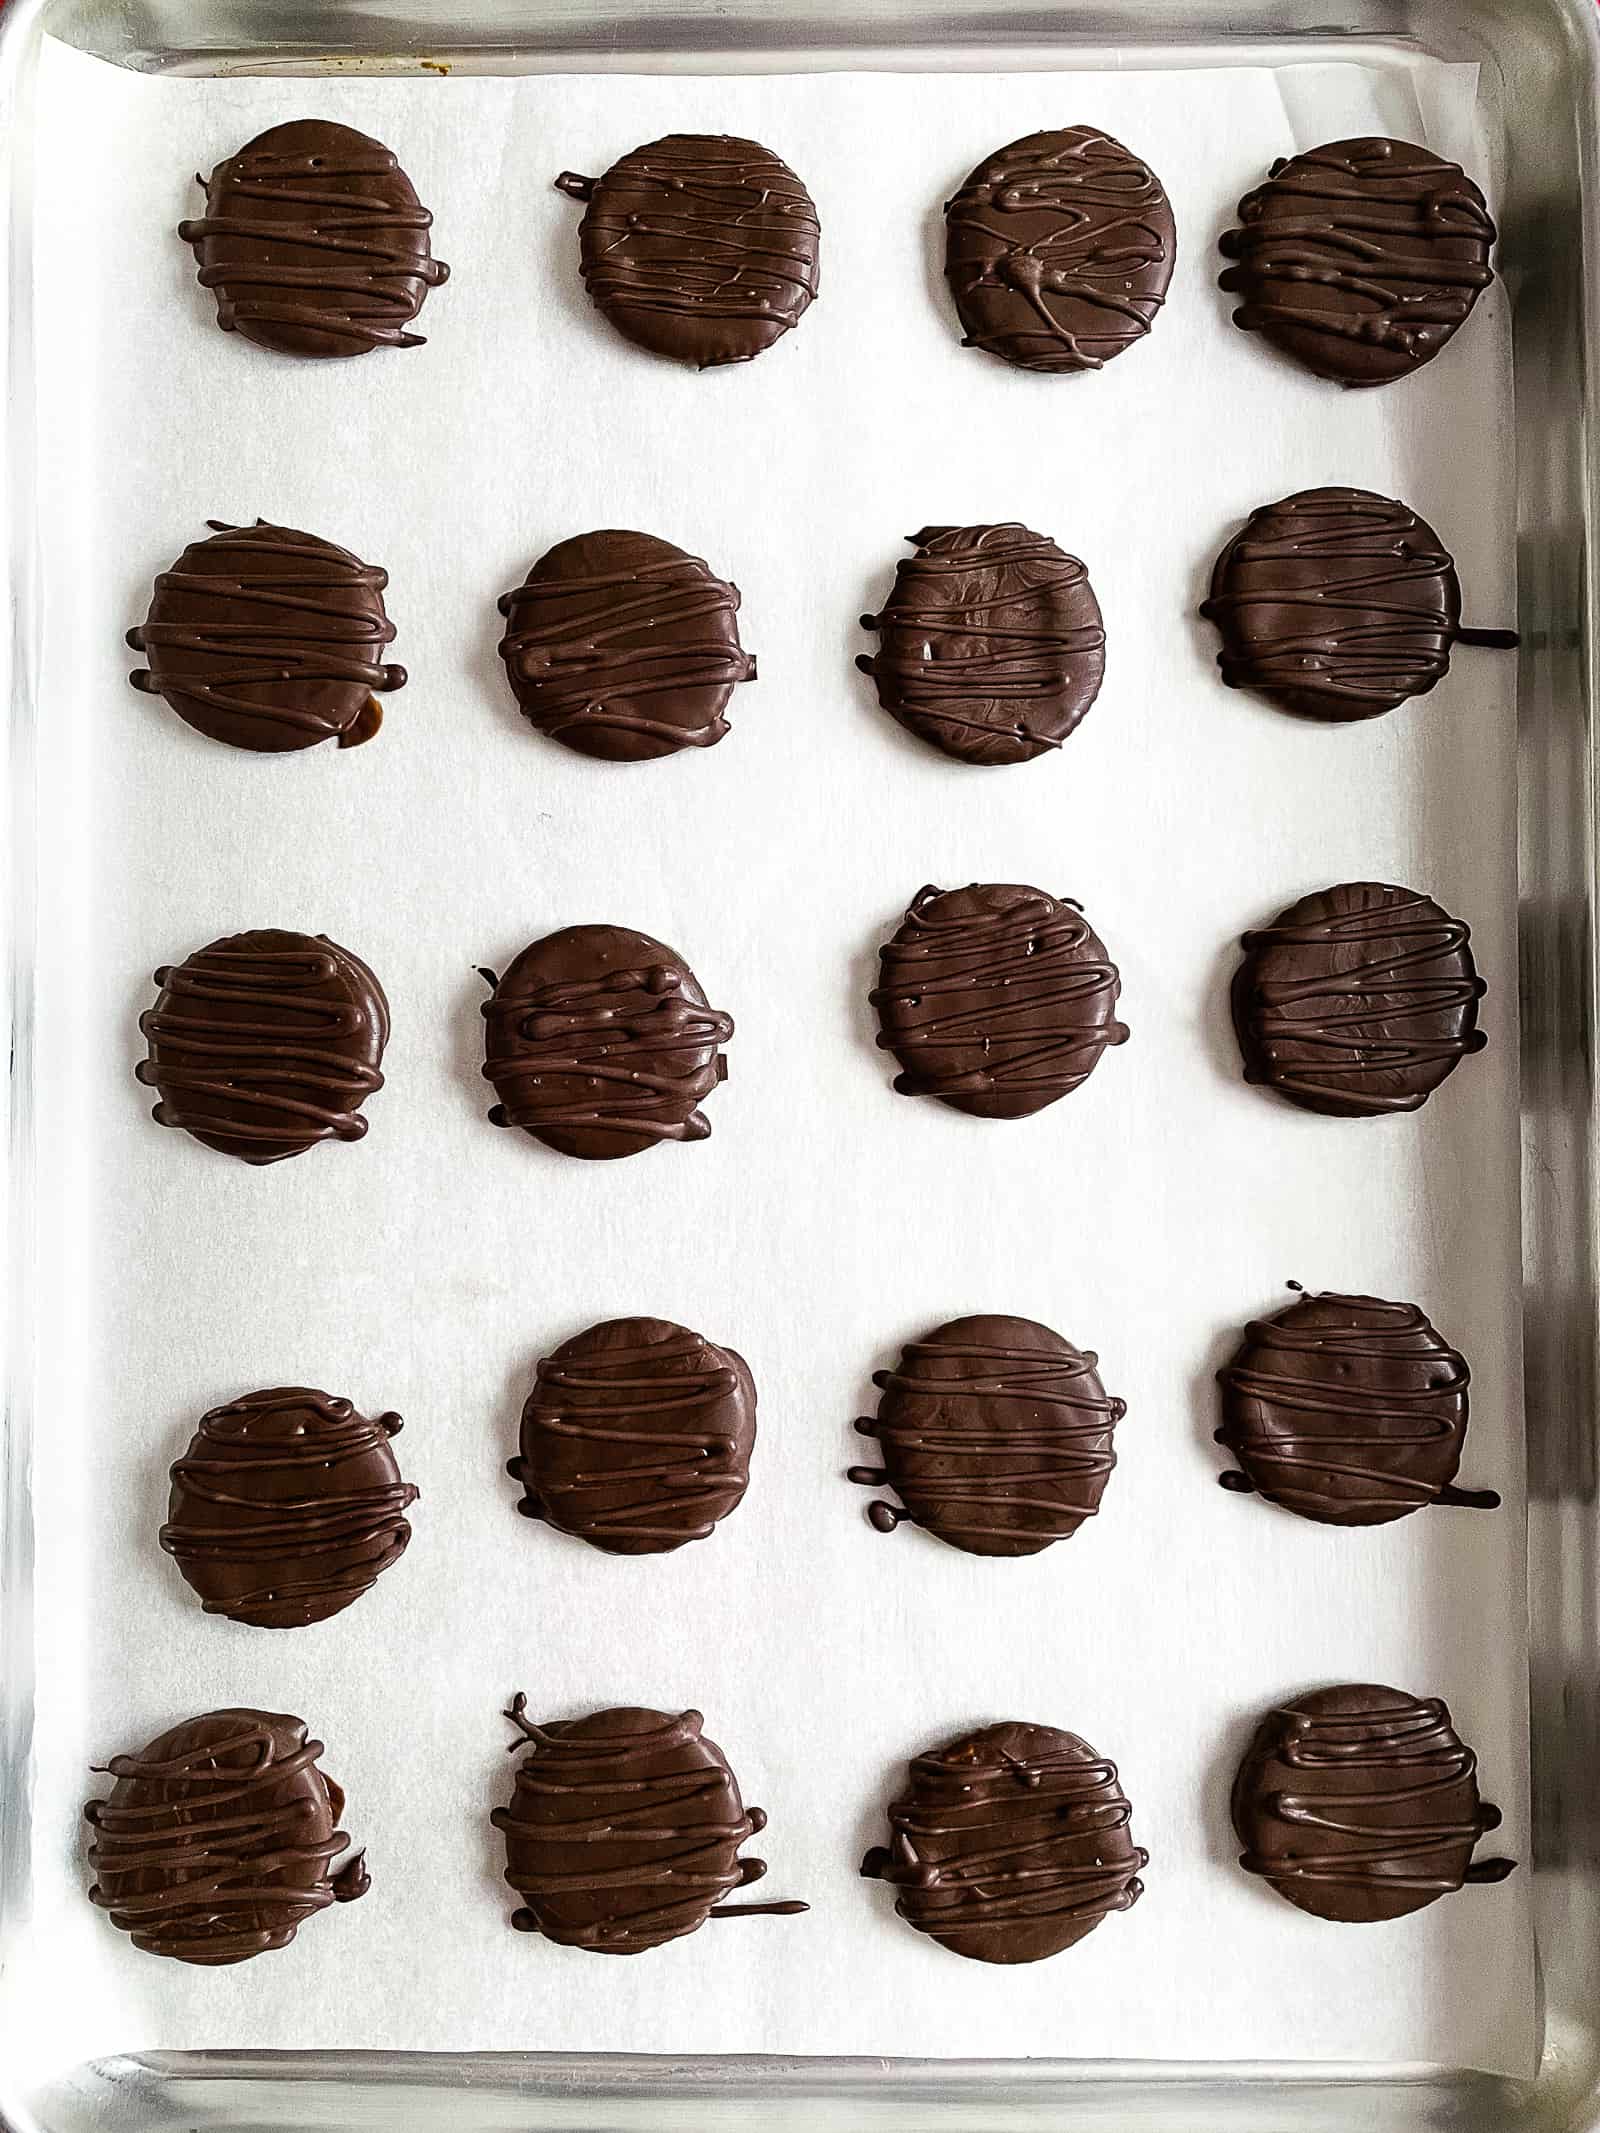 Pan of mint chocolate covered Ritz crackers on a pan.